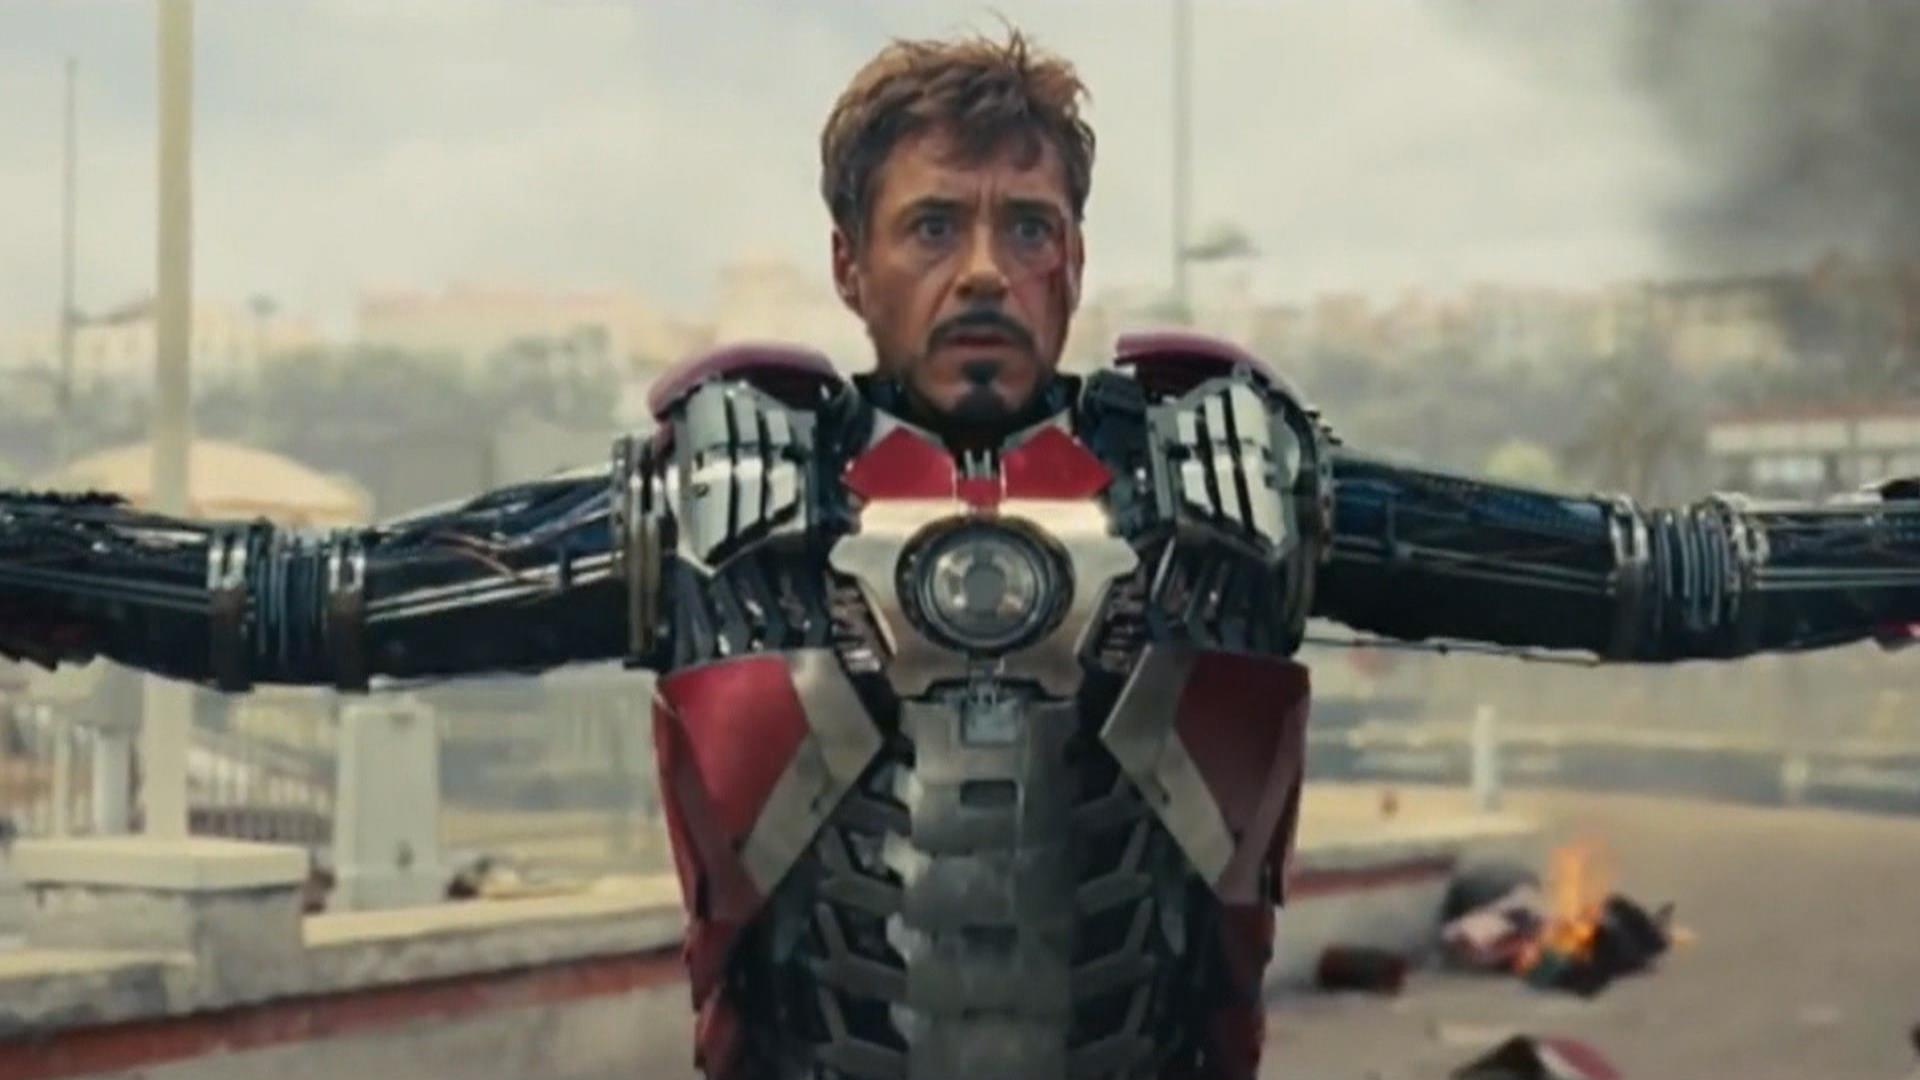 Robert Downey Jr. will step down from 'Iron Man' role